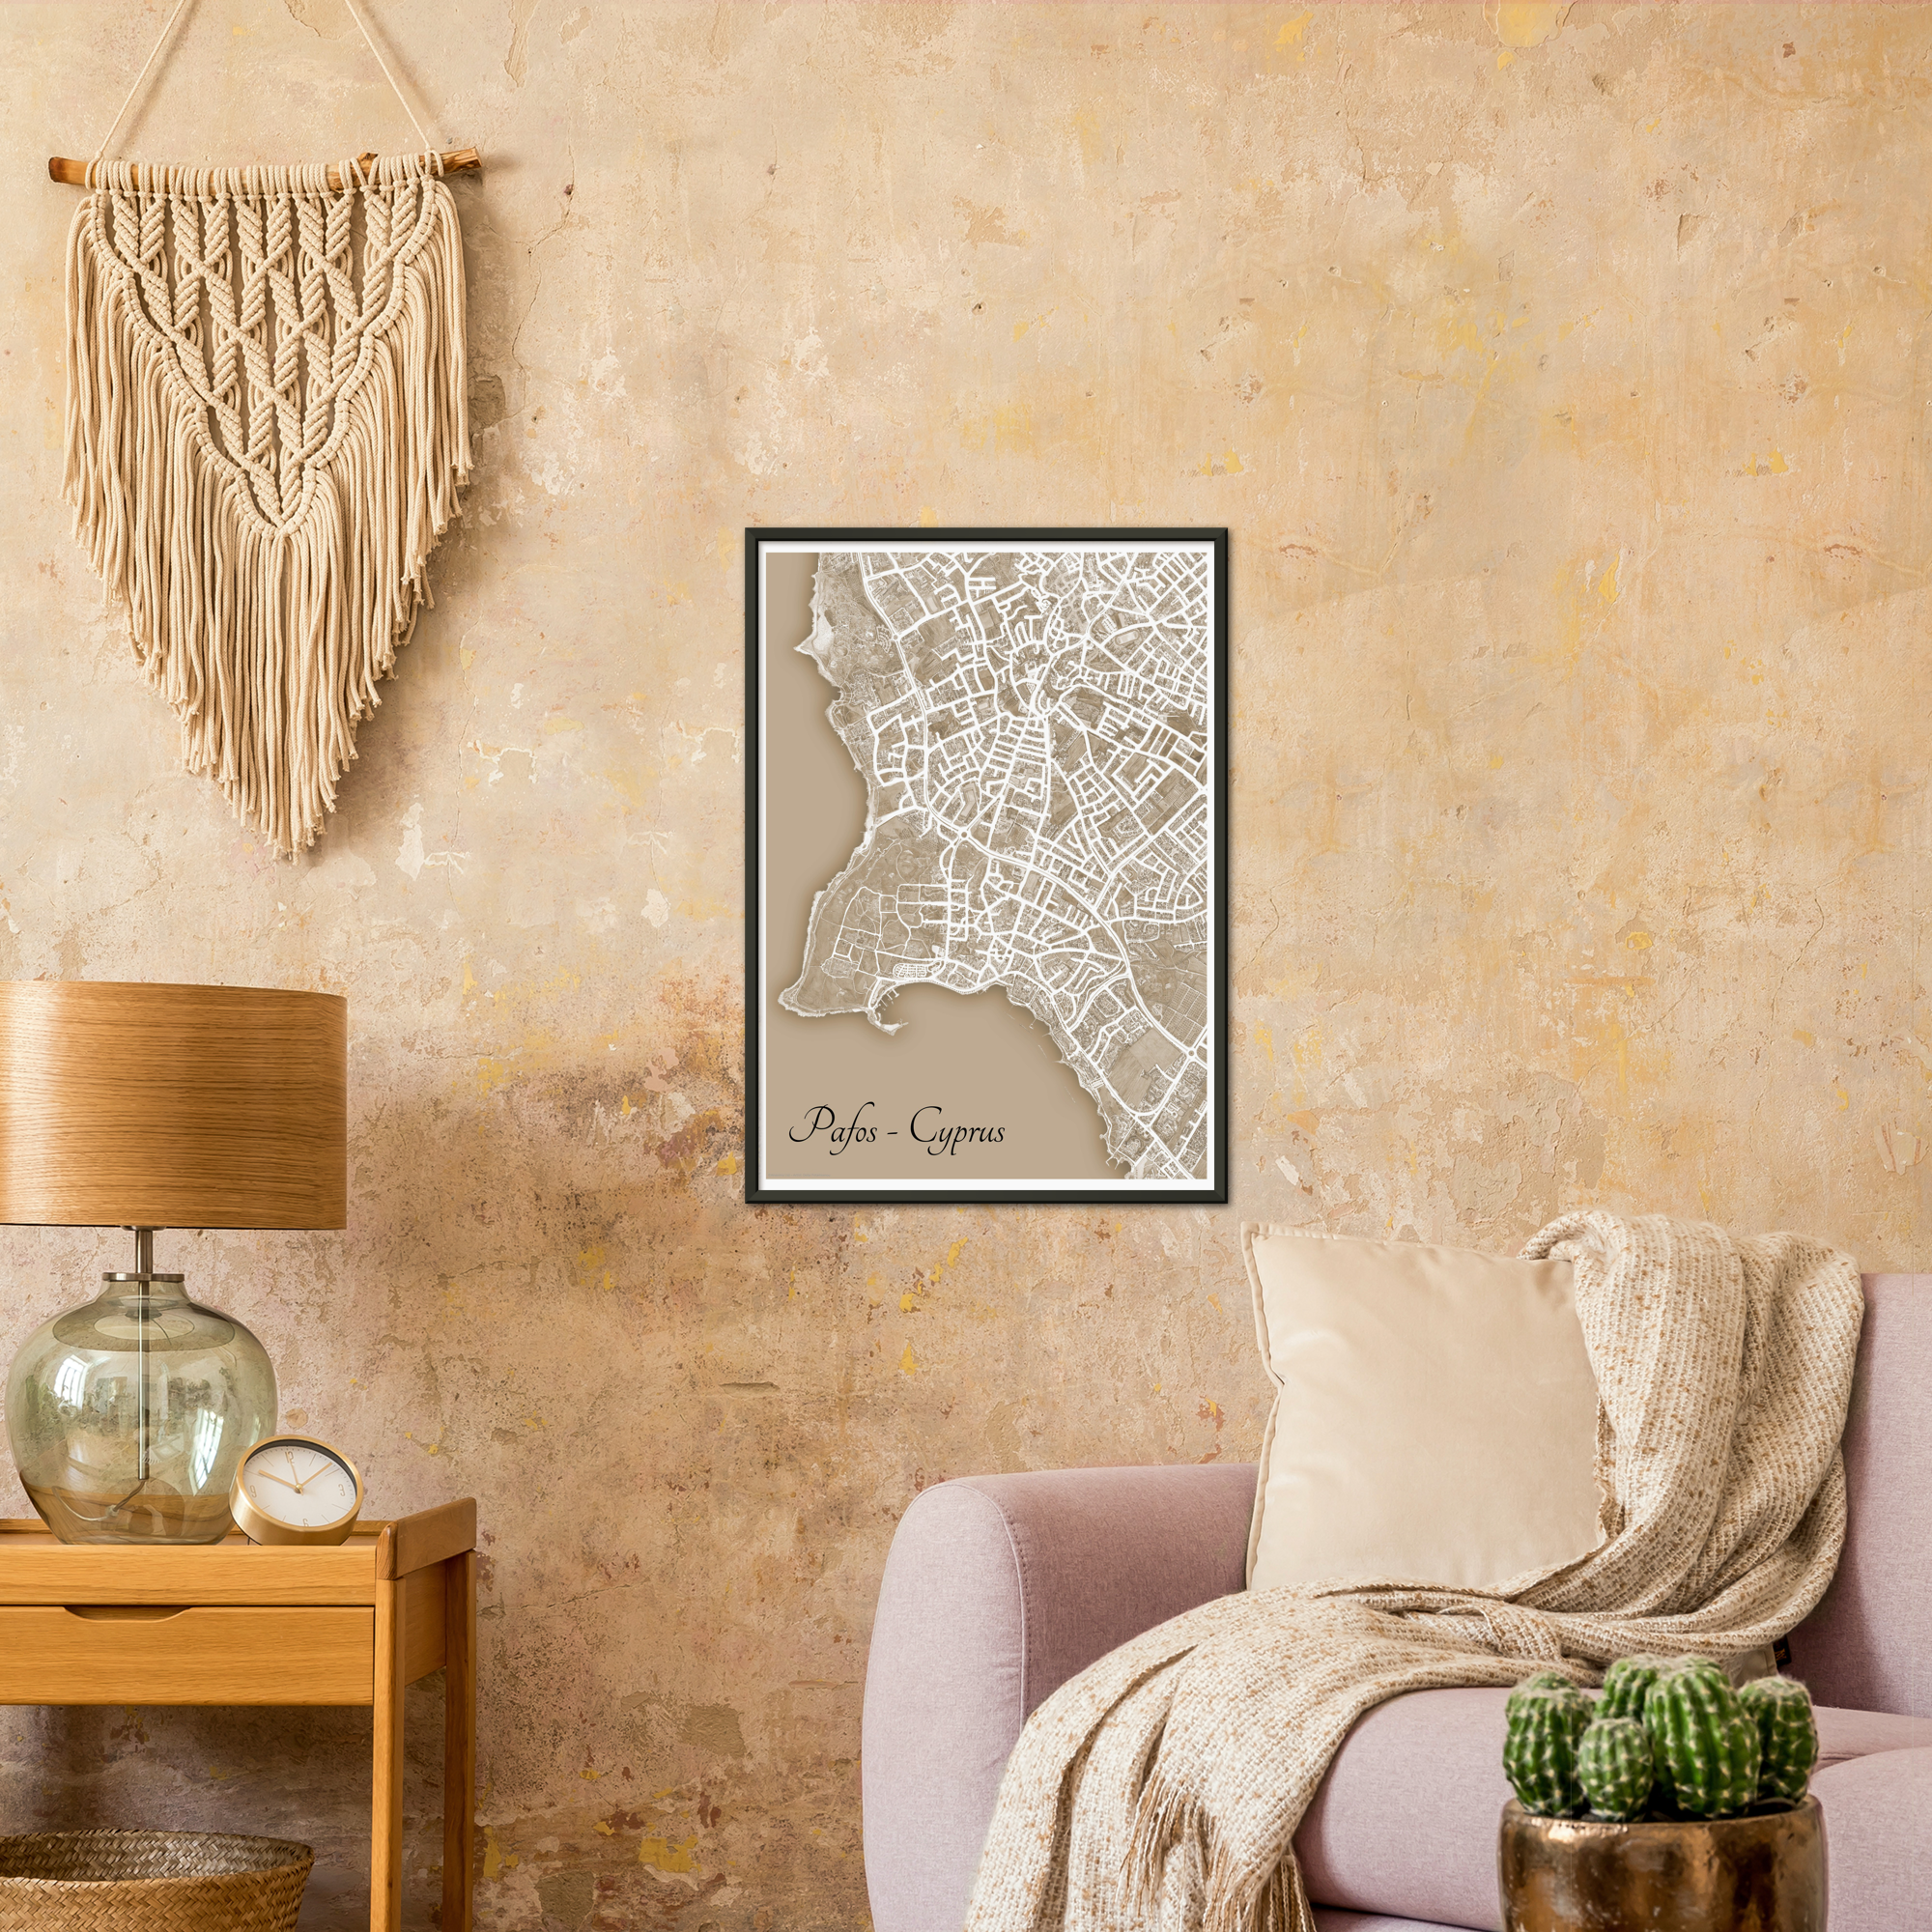 Pafos, Cyprus – Sepia Print – Metal Framed Poster